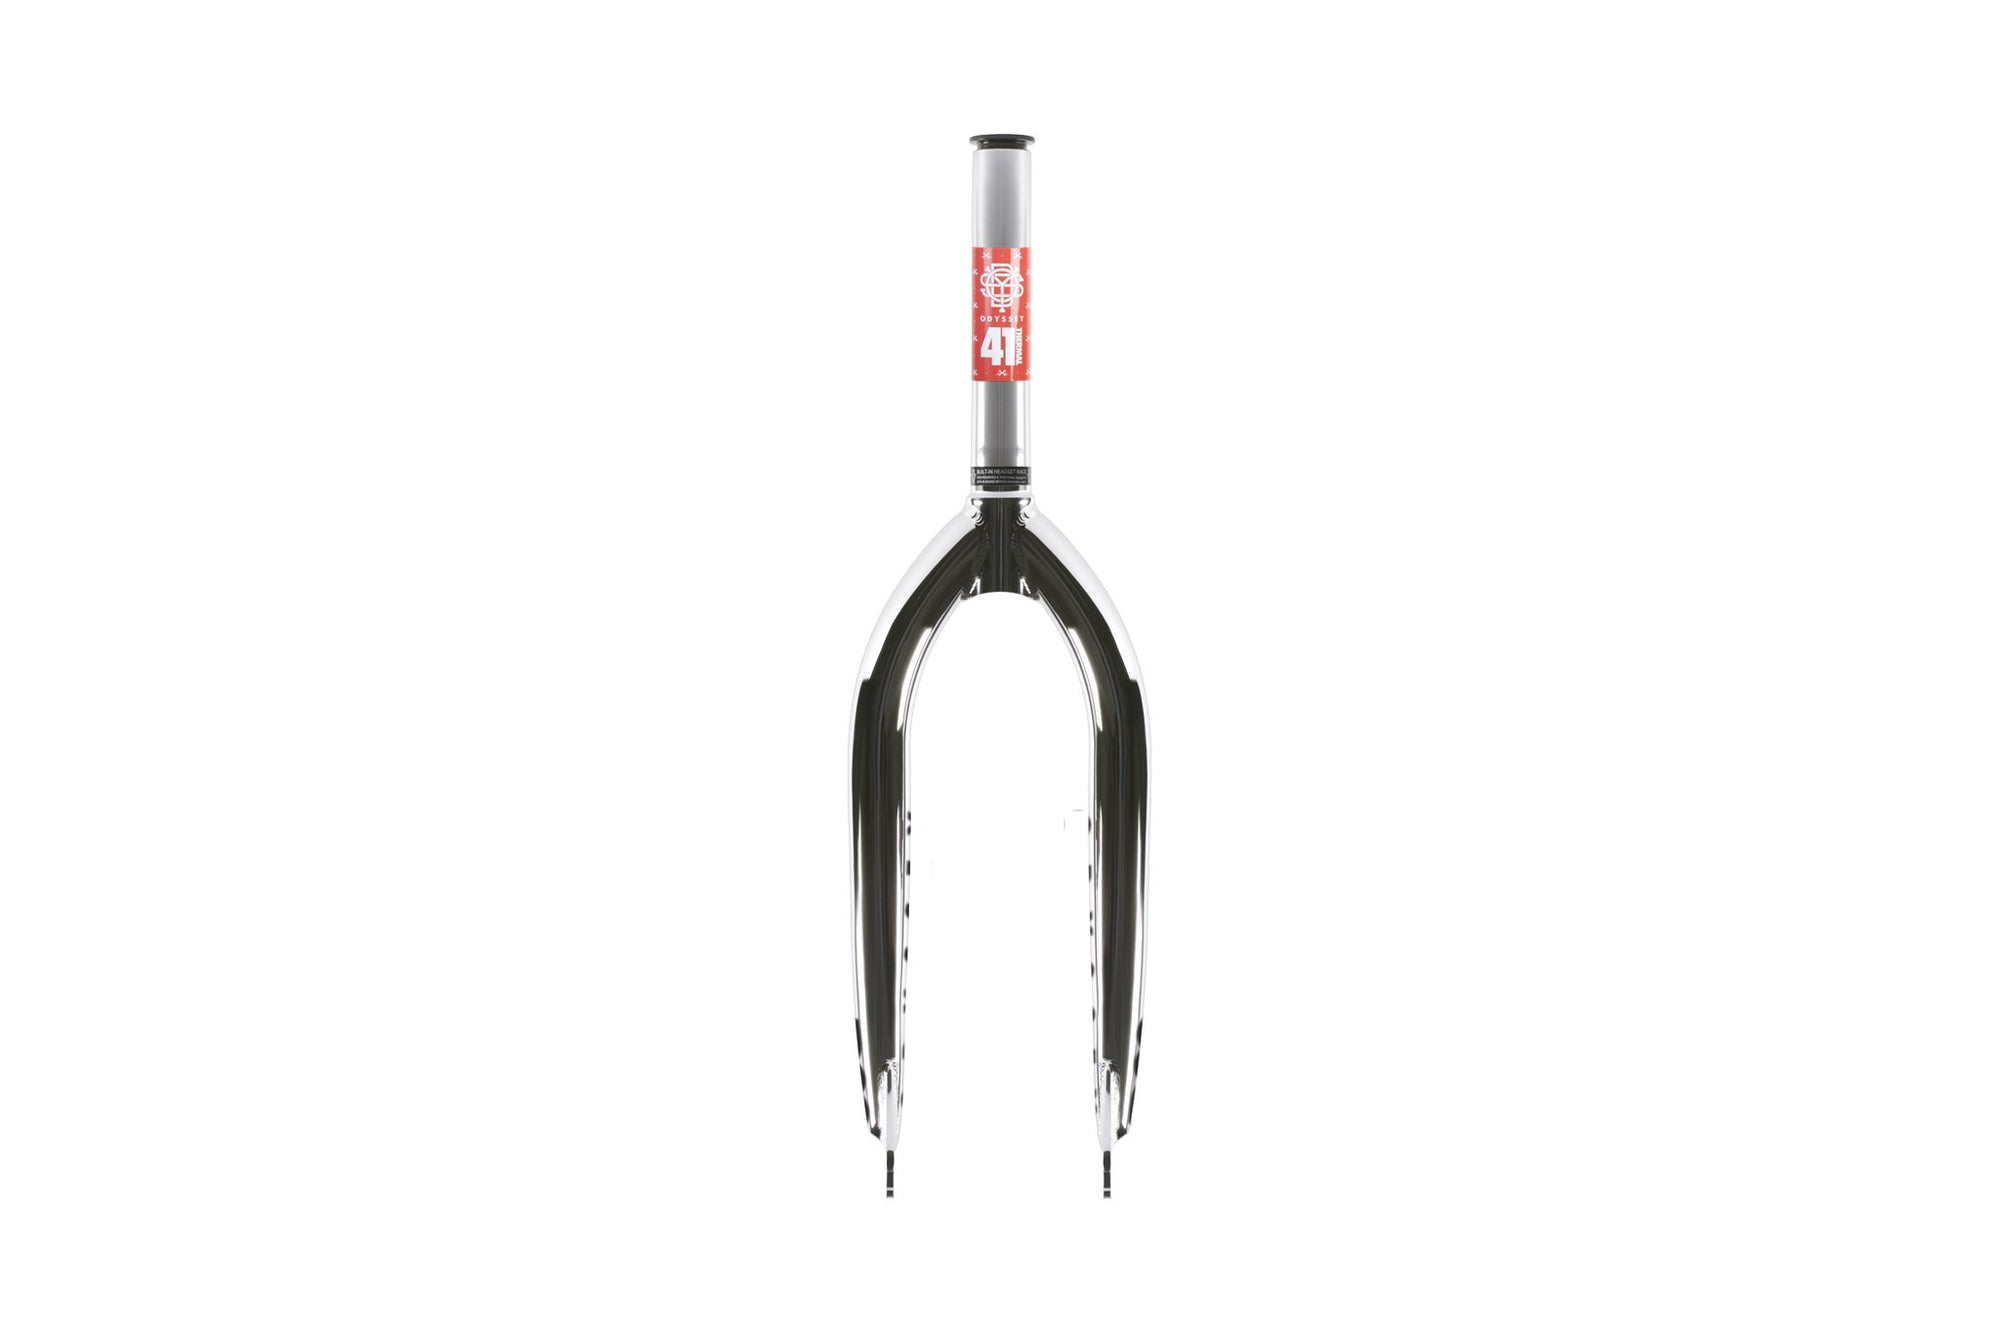 Odyssey R32 Forks (Rust Proof Black or Chrome) - Downtown Bicycle Works 